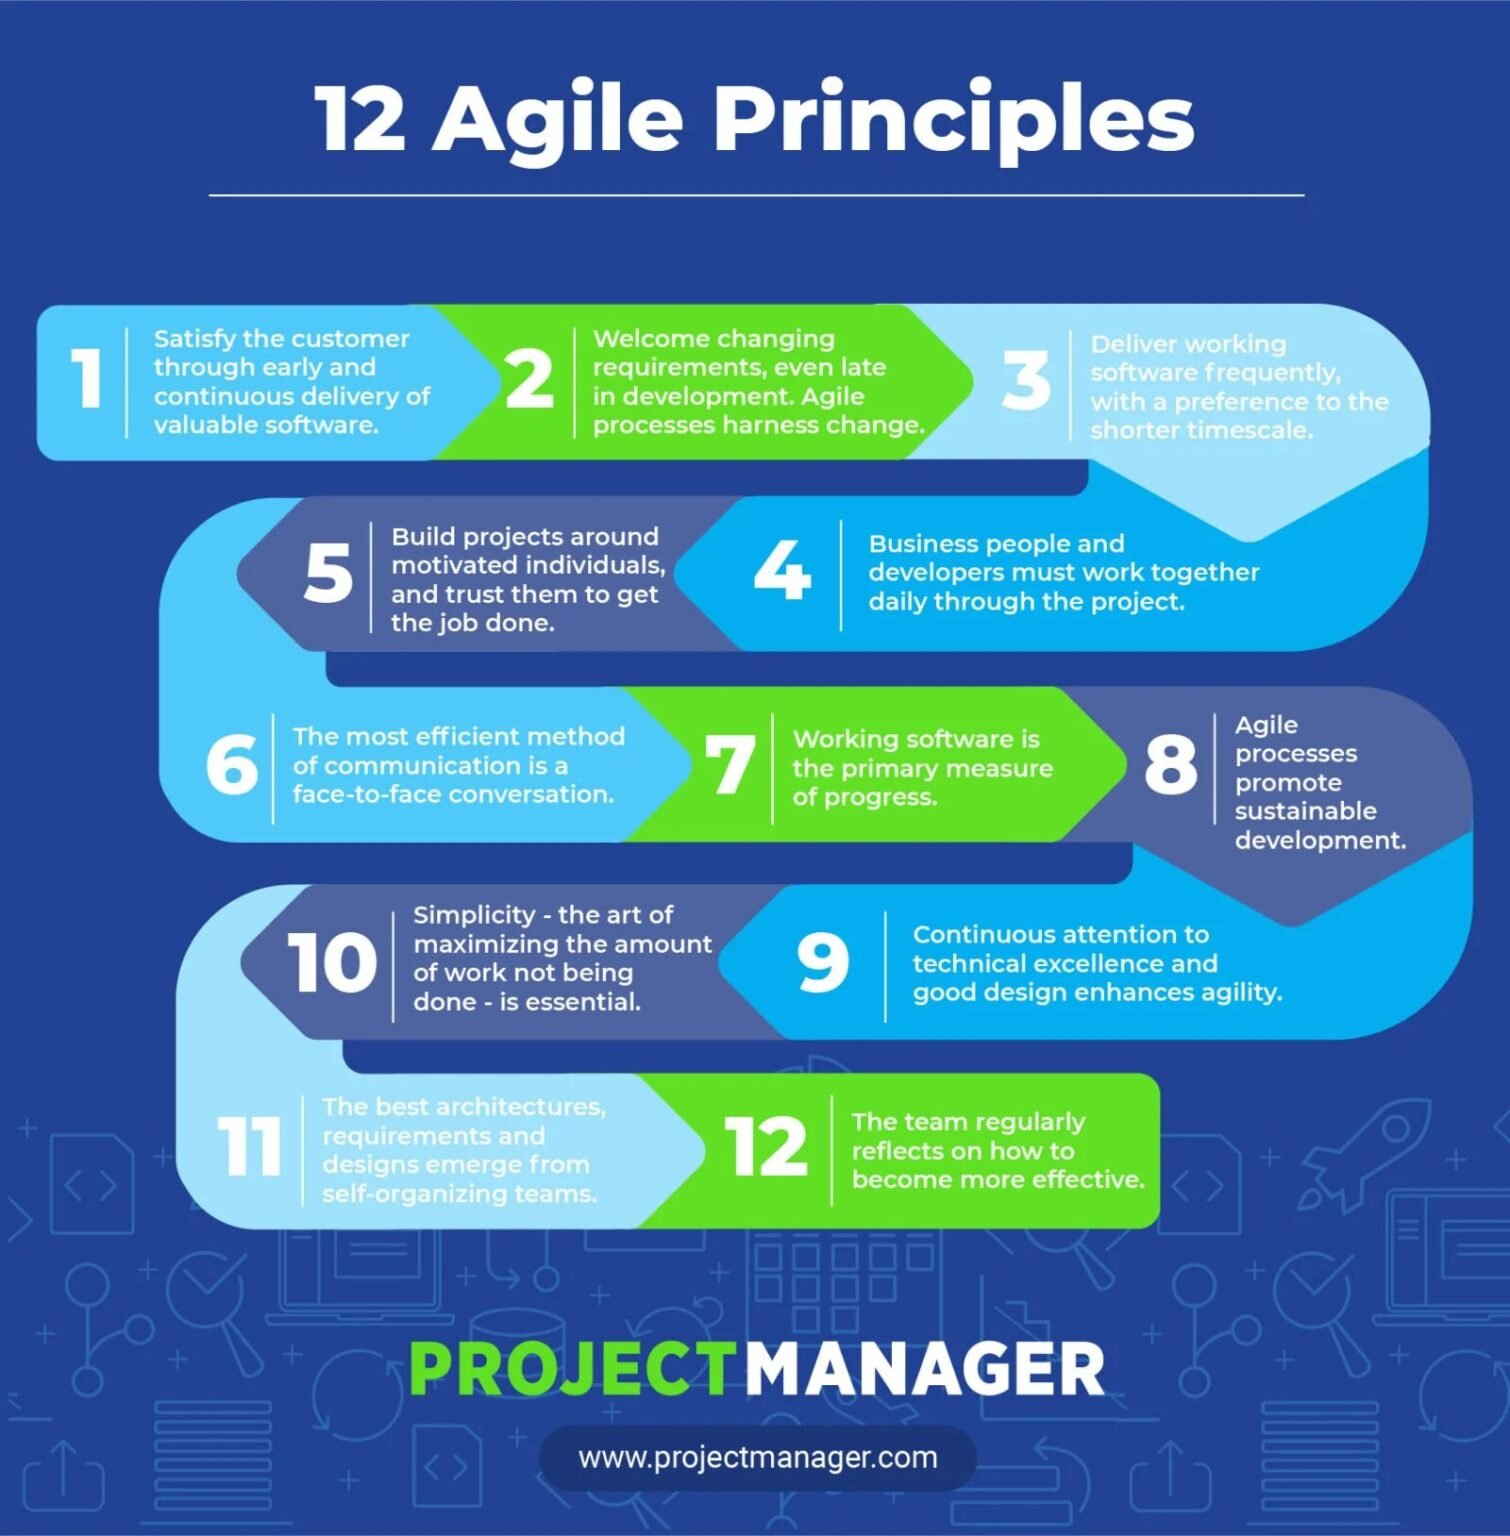 agile project management thesis topics